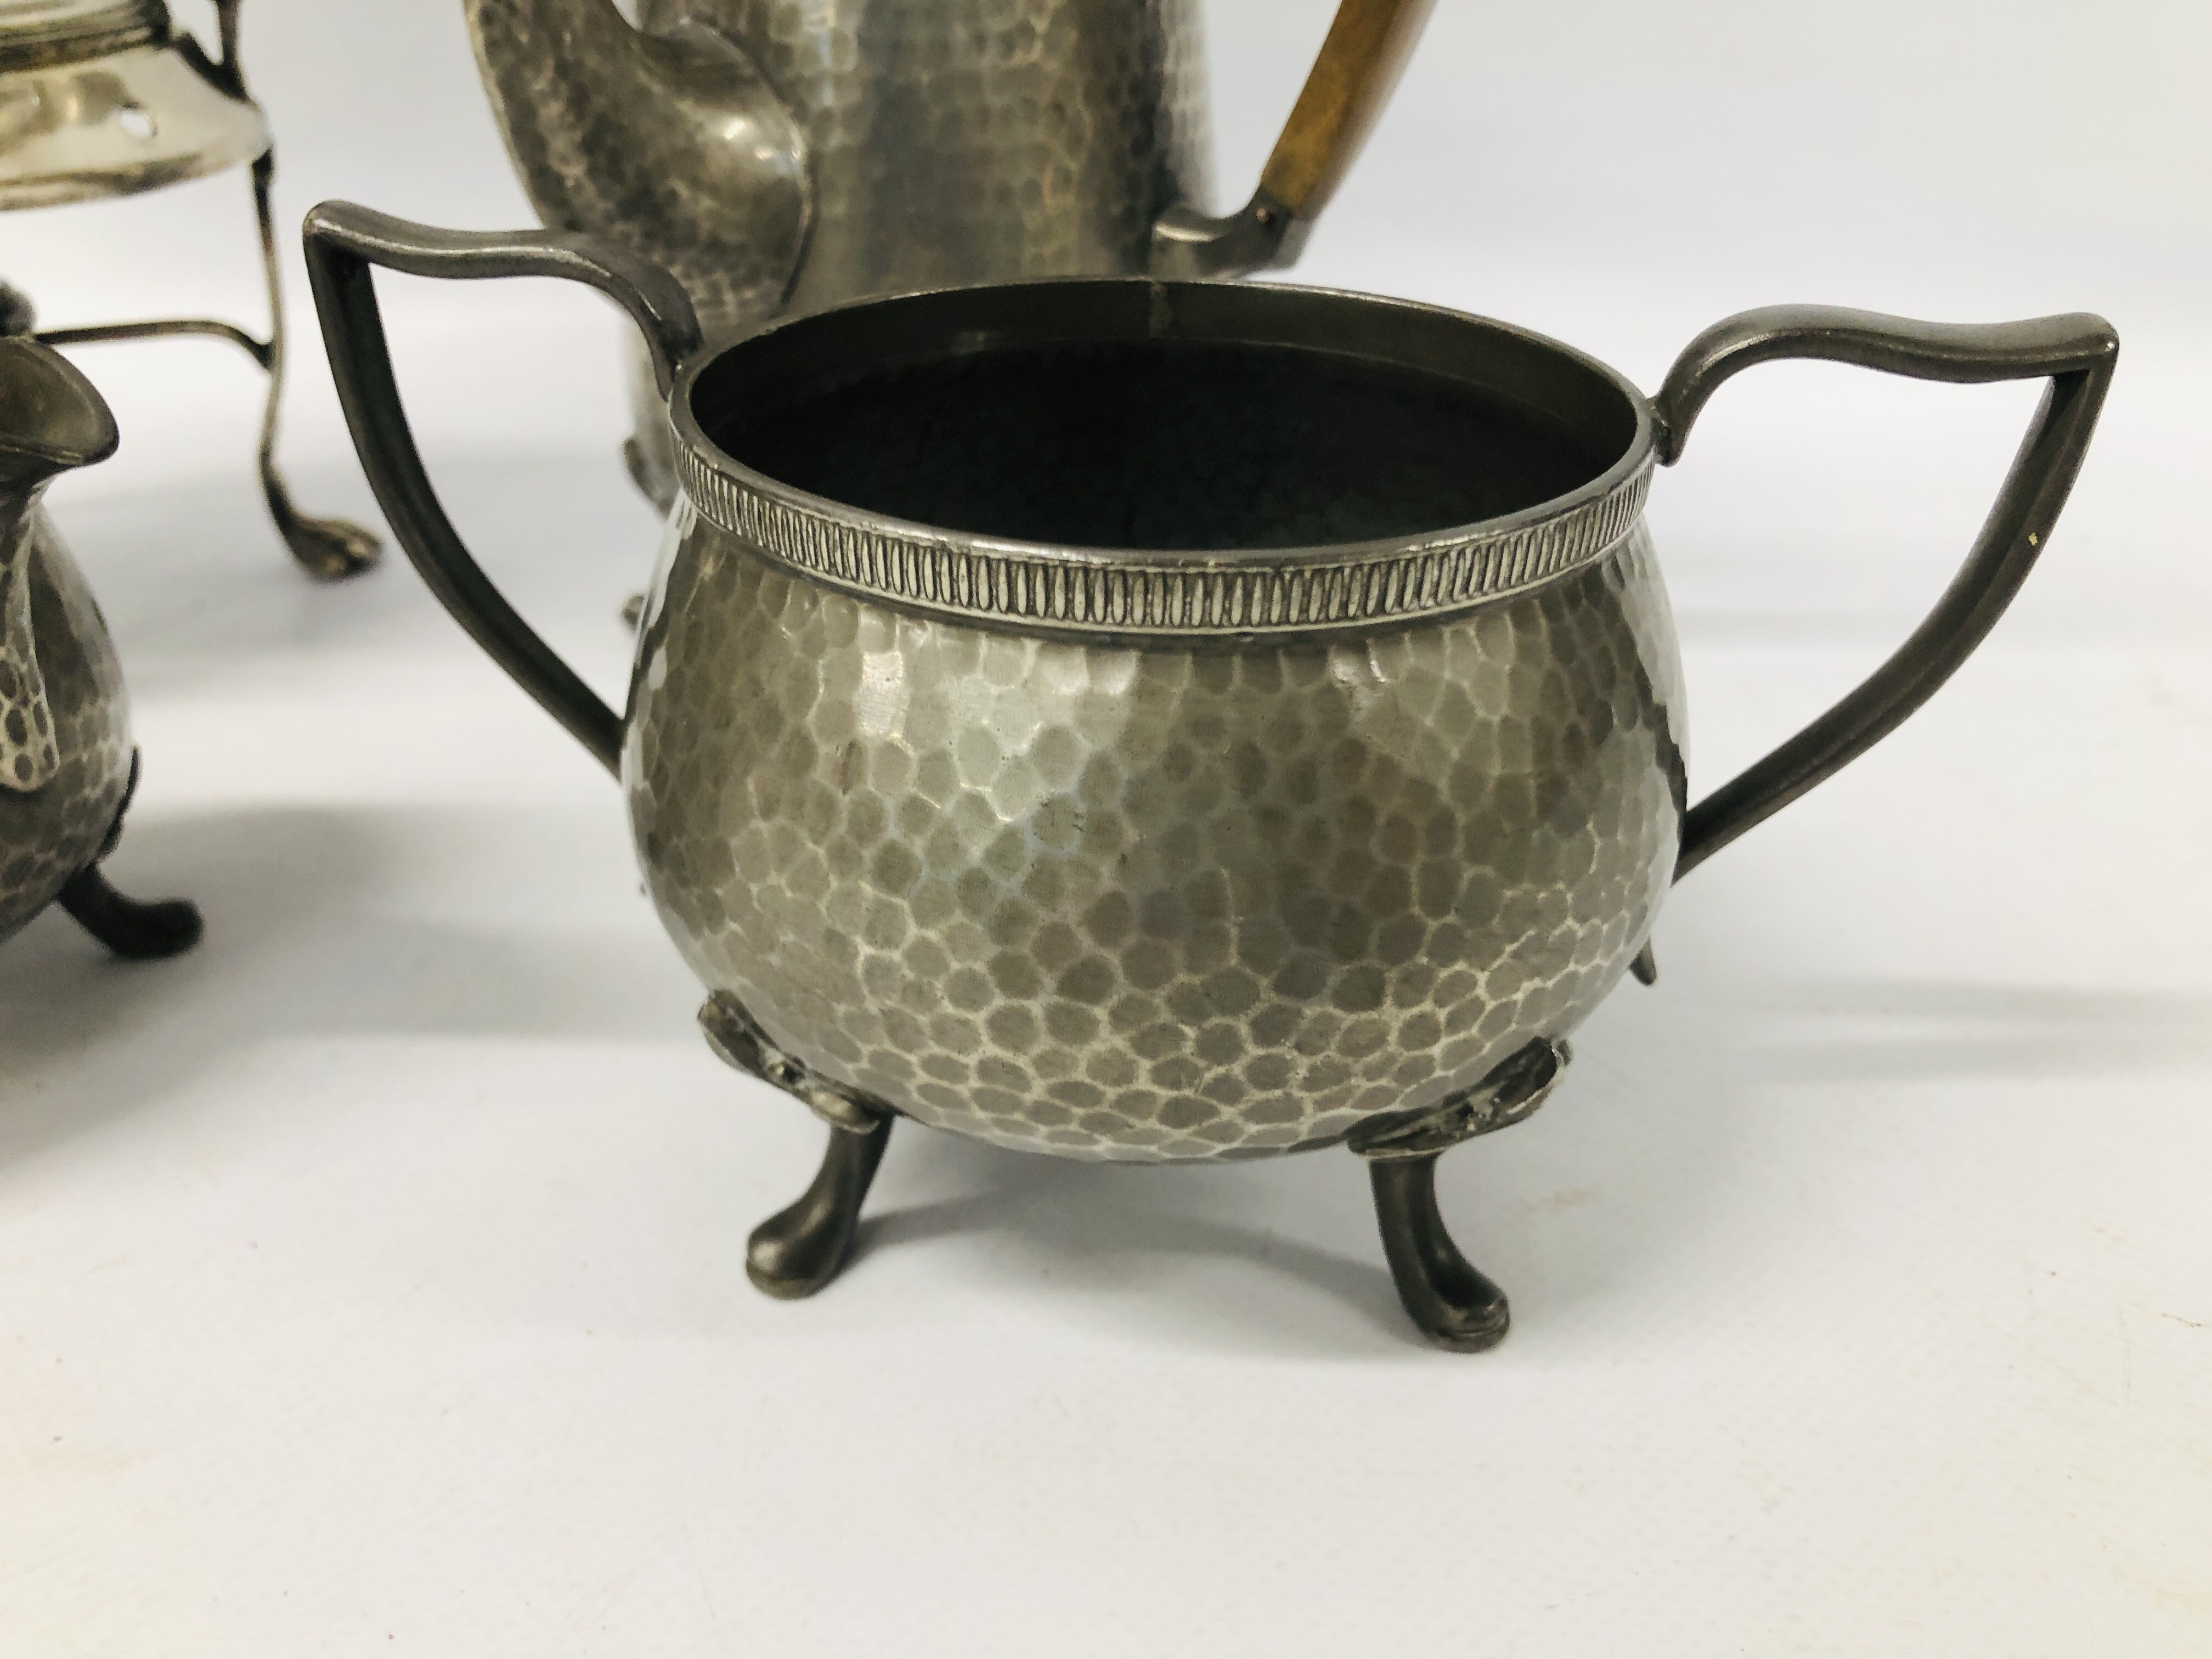 VINTAGE SILVER PLATED SPIRIT KETTLE ALONG WITH A VINTAGE 3 PIECE ARTS AND CRAFTS DON PEWTER TEASET - Image 3 of 6